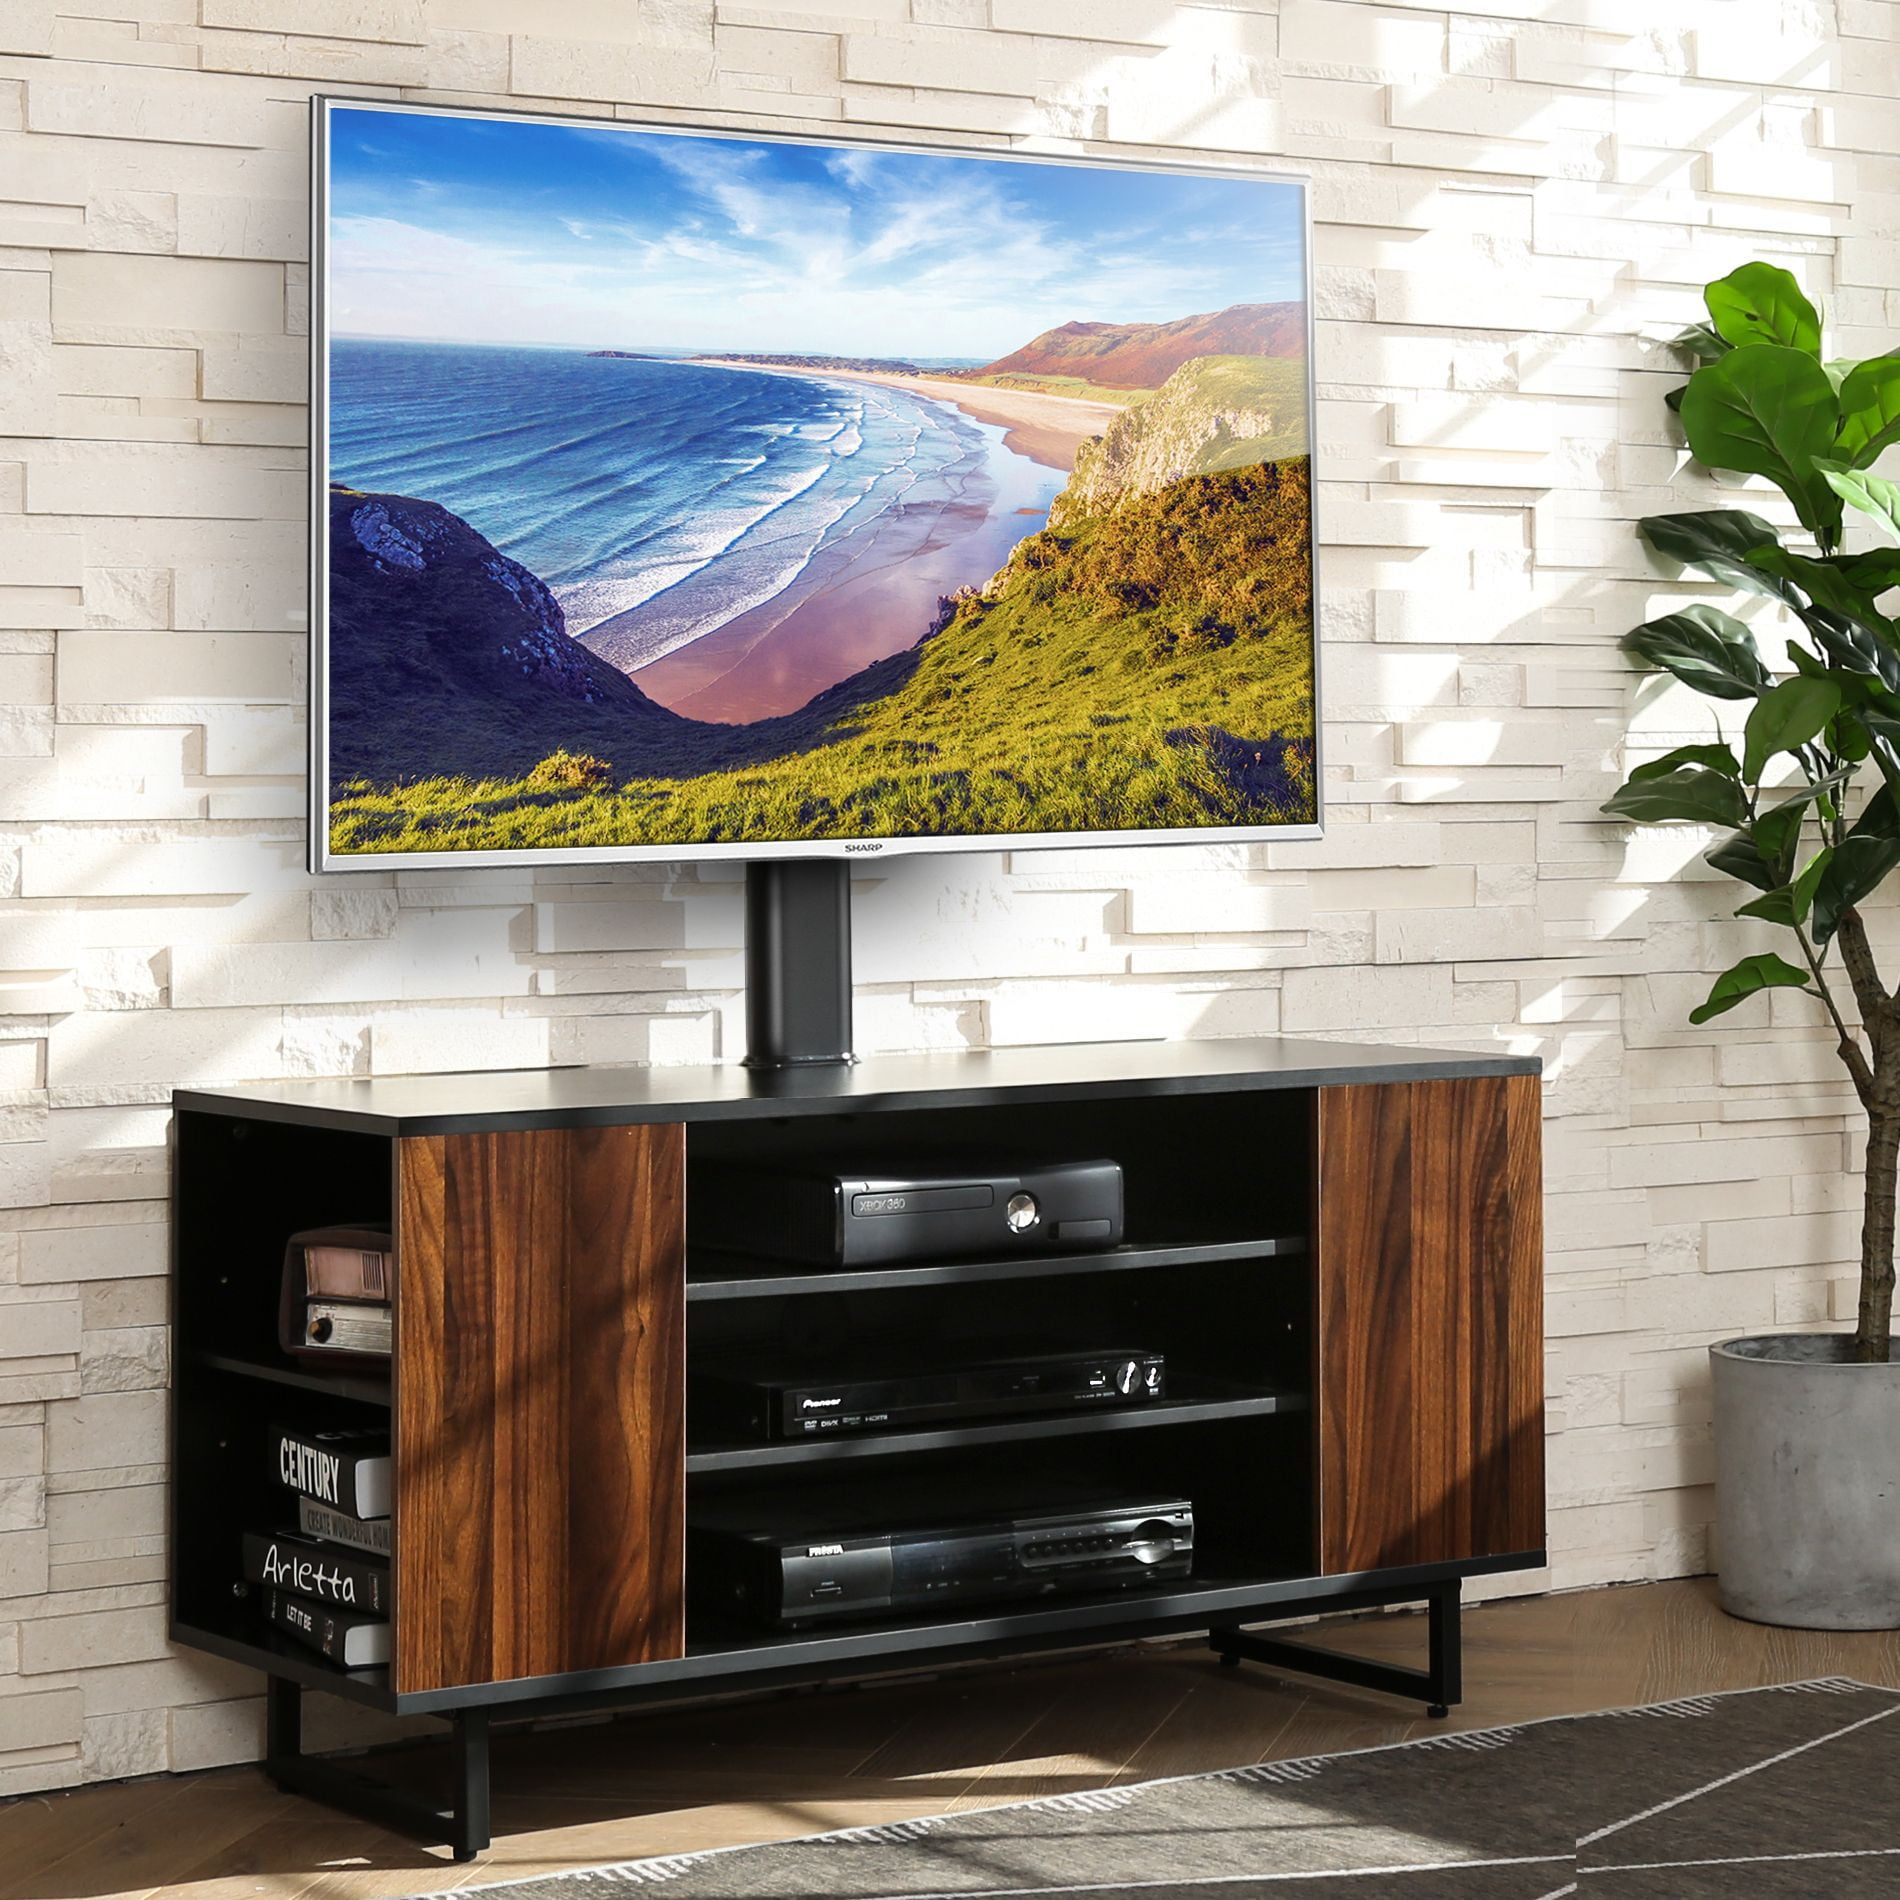 FITUEYES Universal TV Stand Base - Floor TV Stand with ...